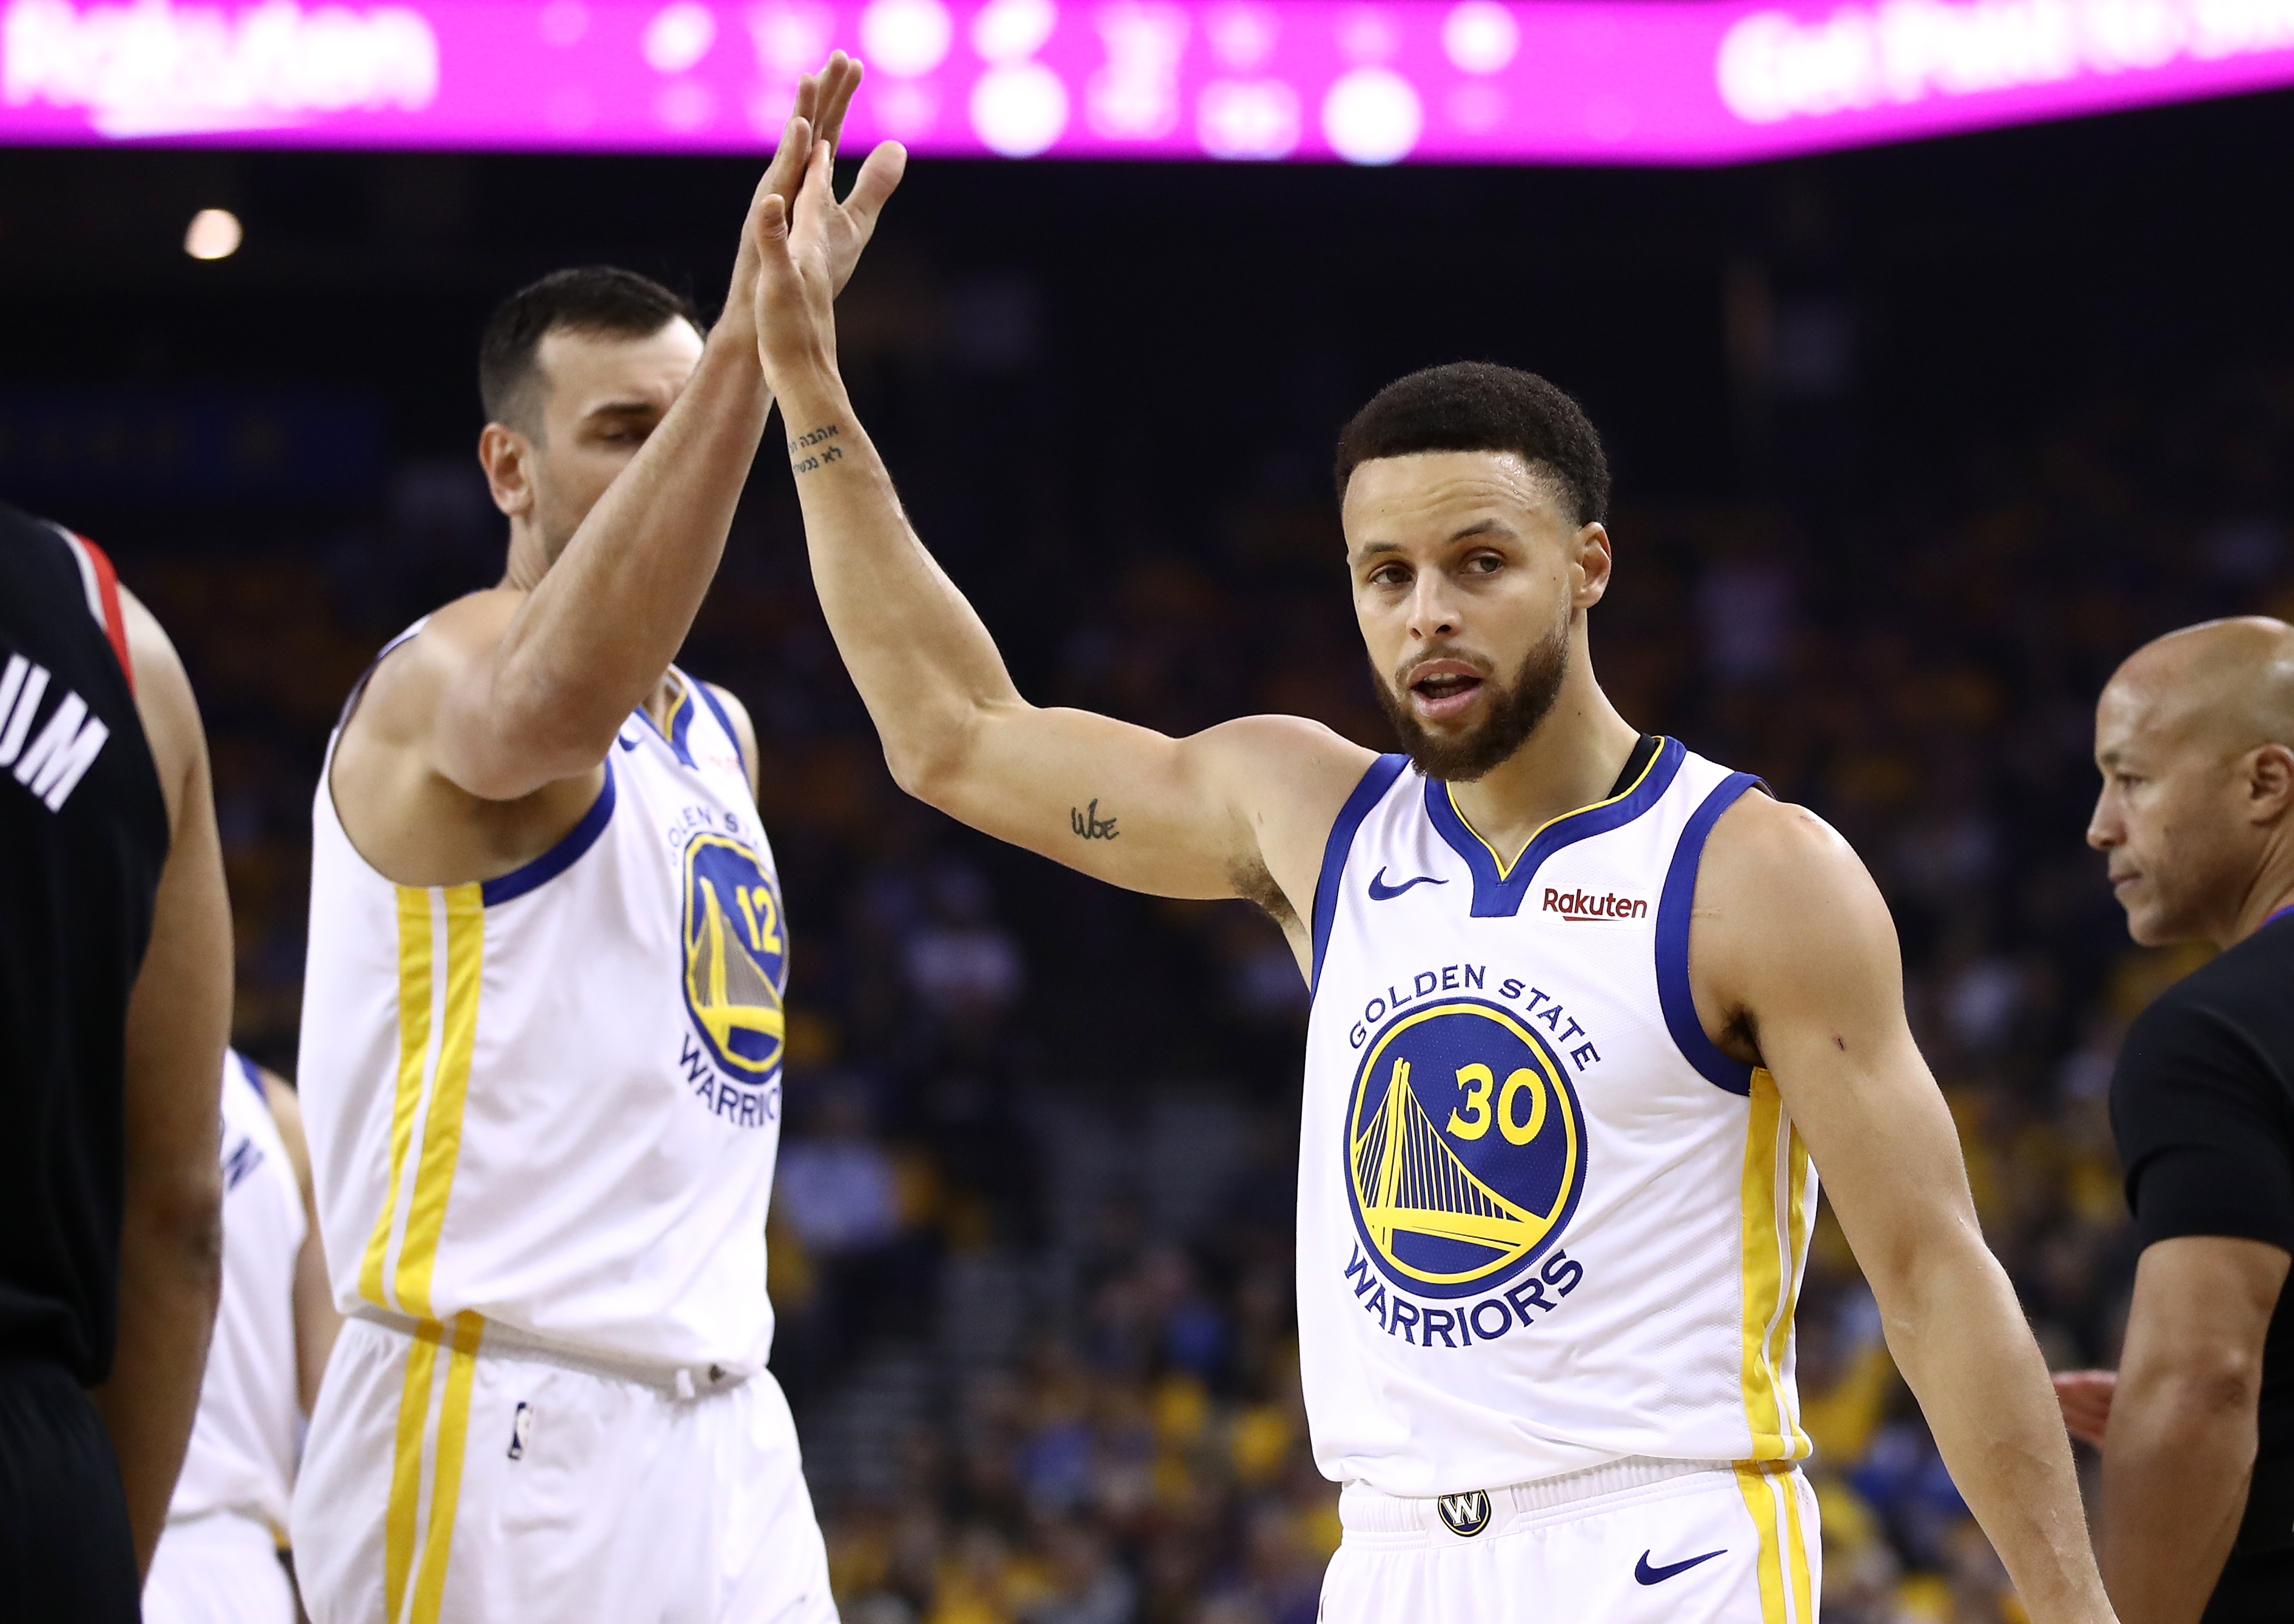 Golden State Warriors guard Steph Curry is ready to spend the rest of his career in California.